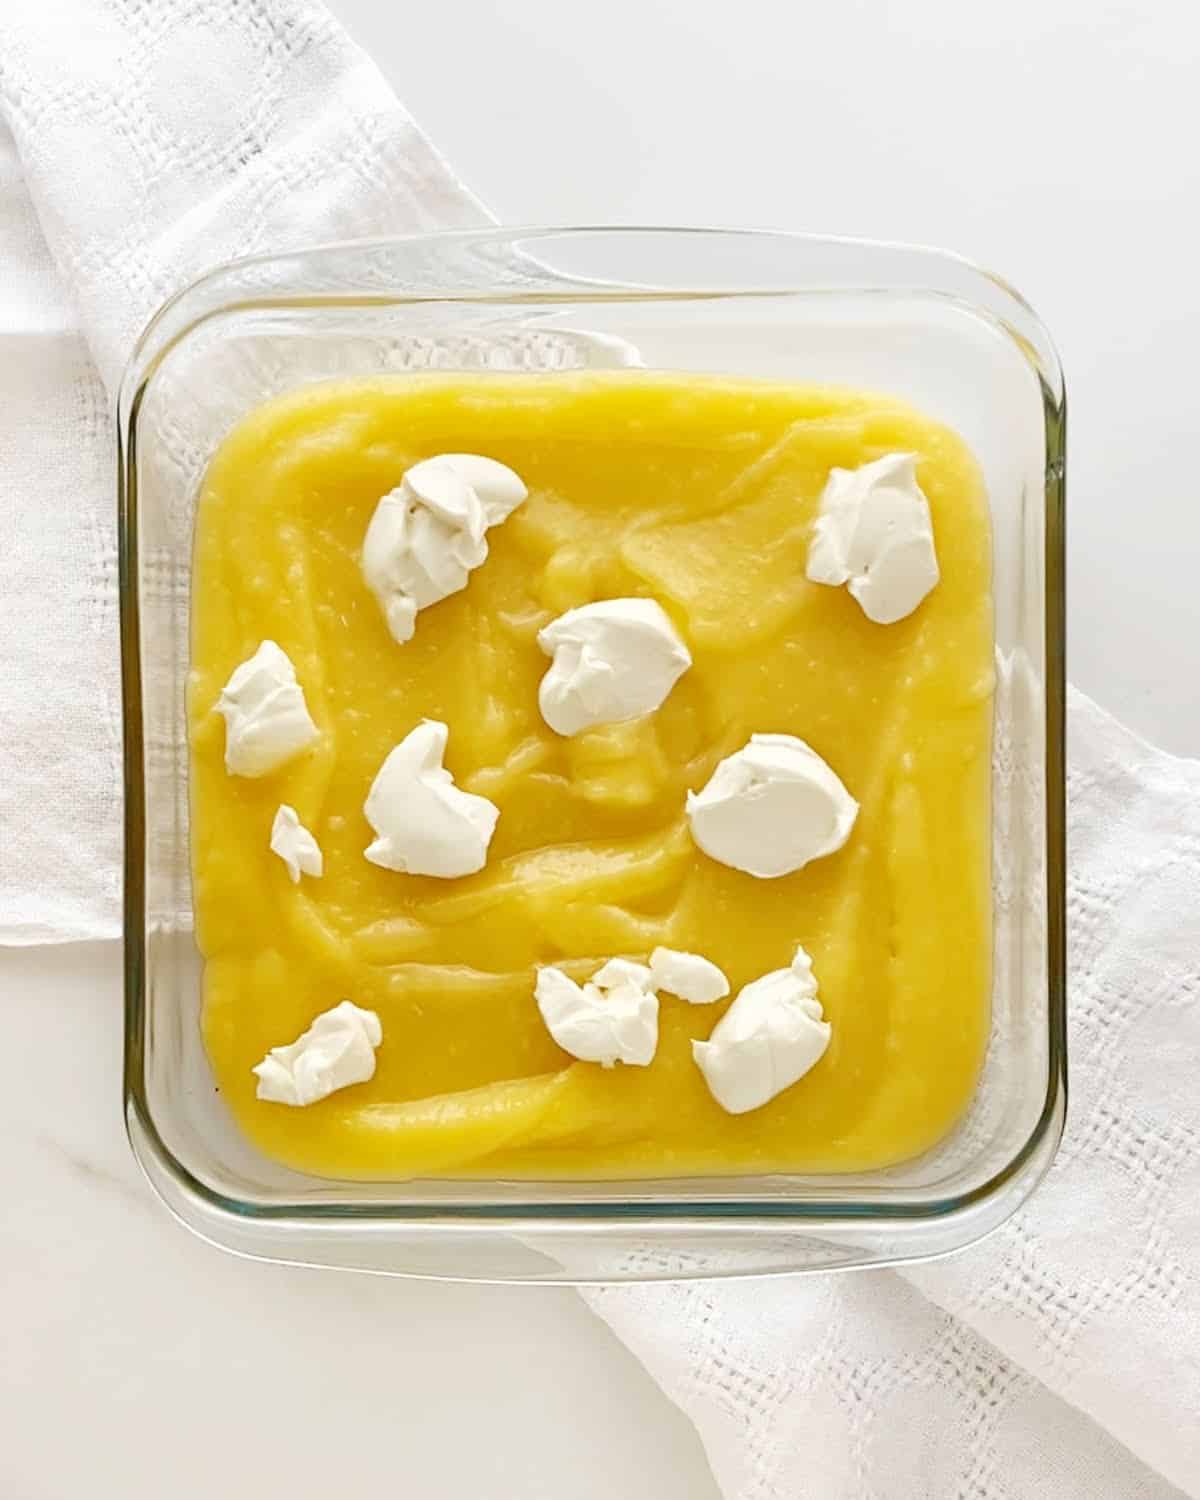 Glass square dish with lemon curd and cream cheese dollops on a white cloth and surface.